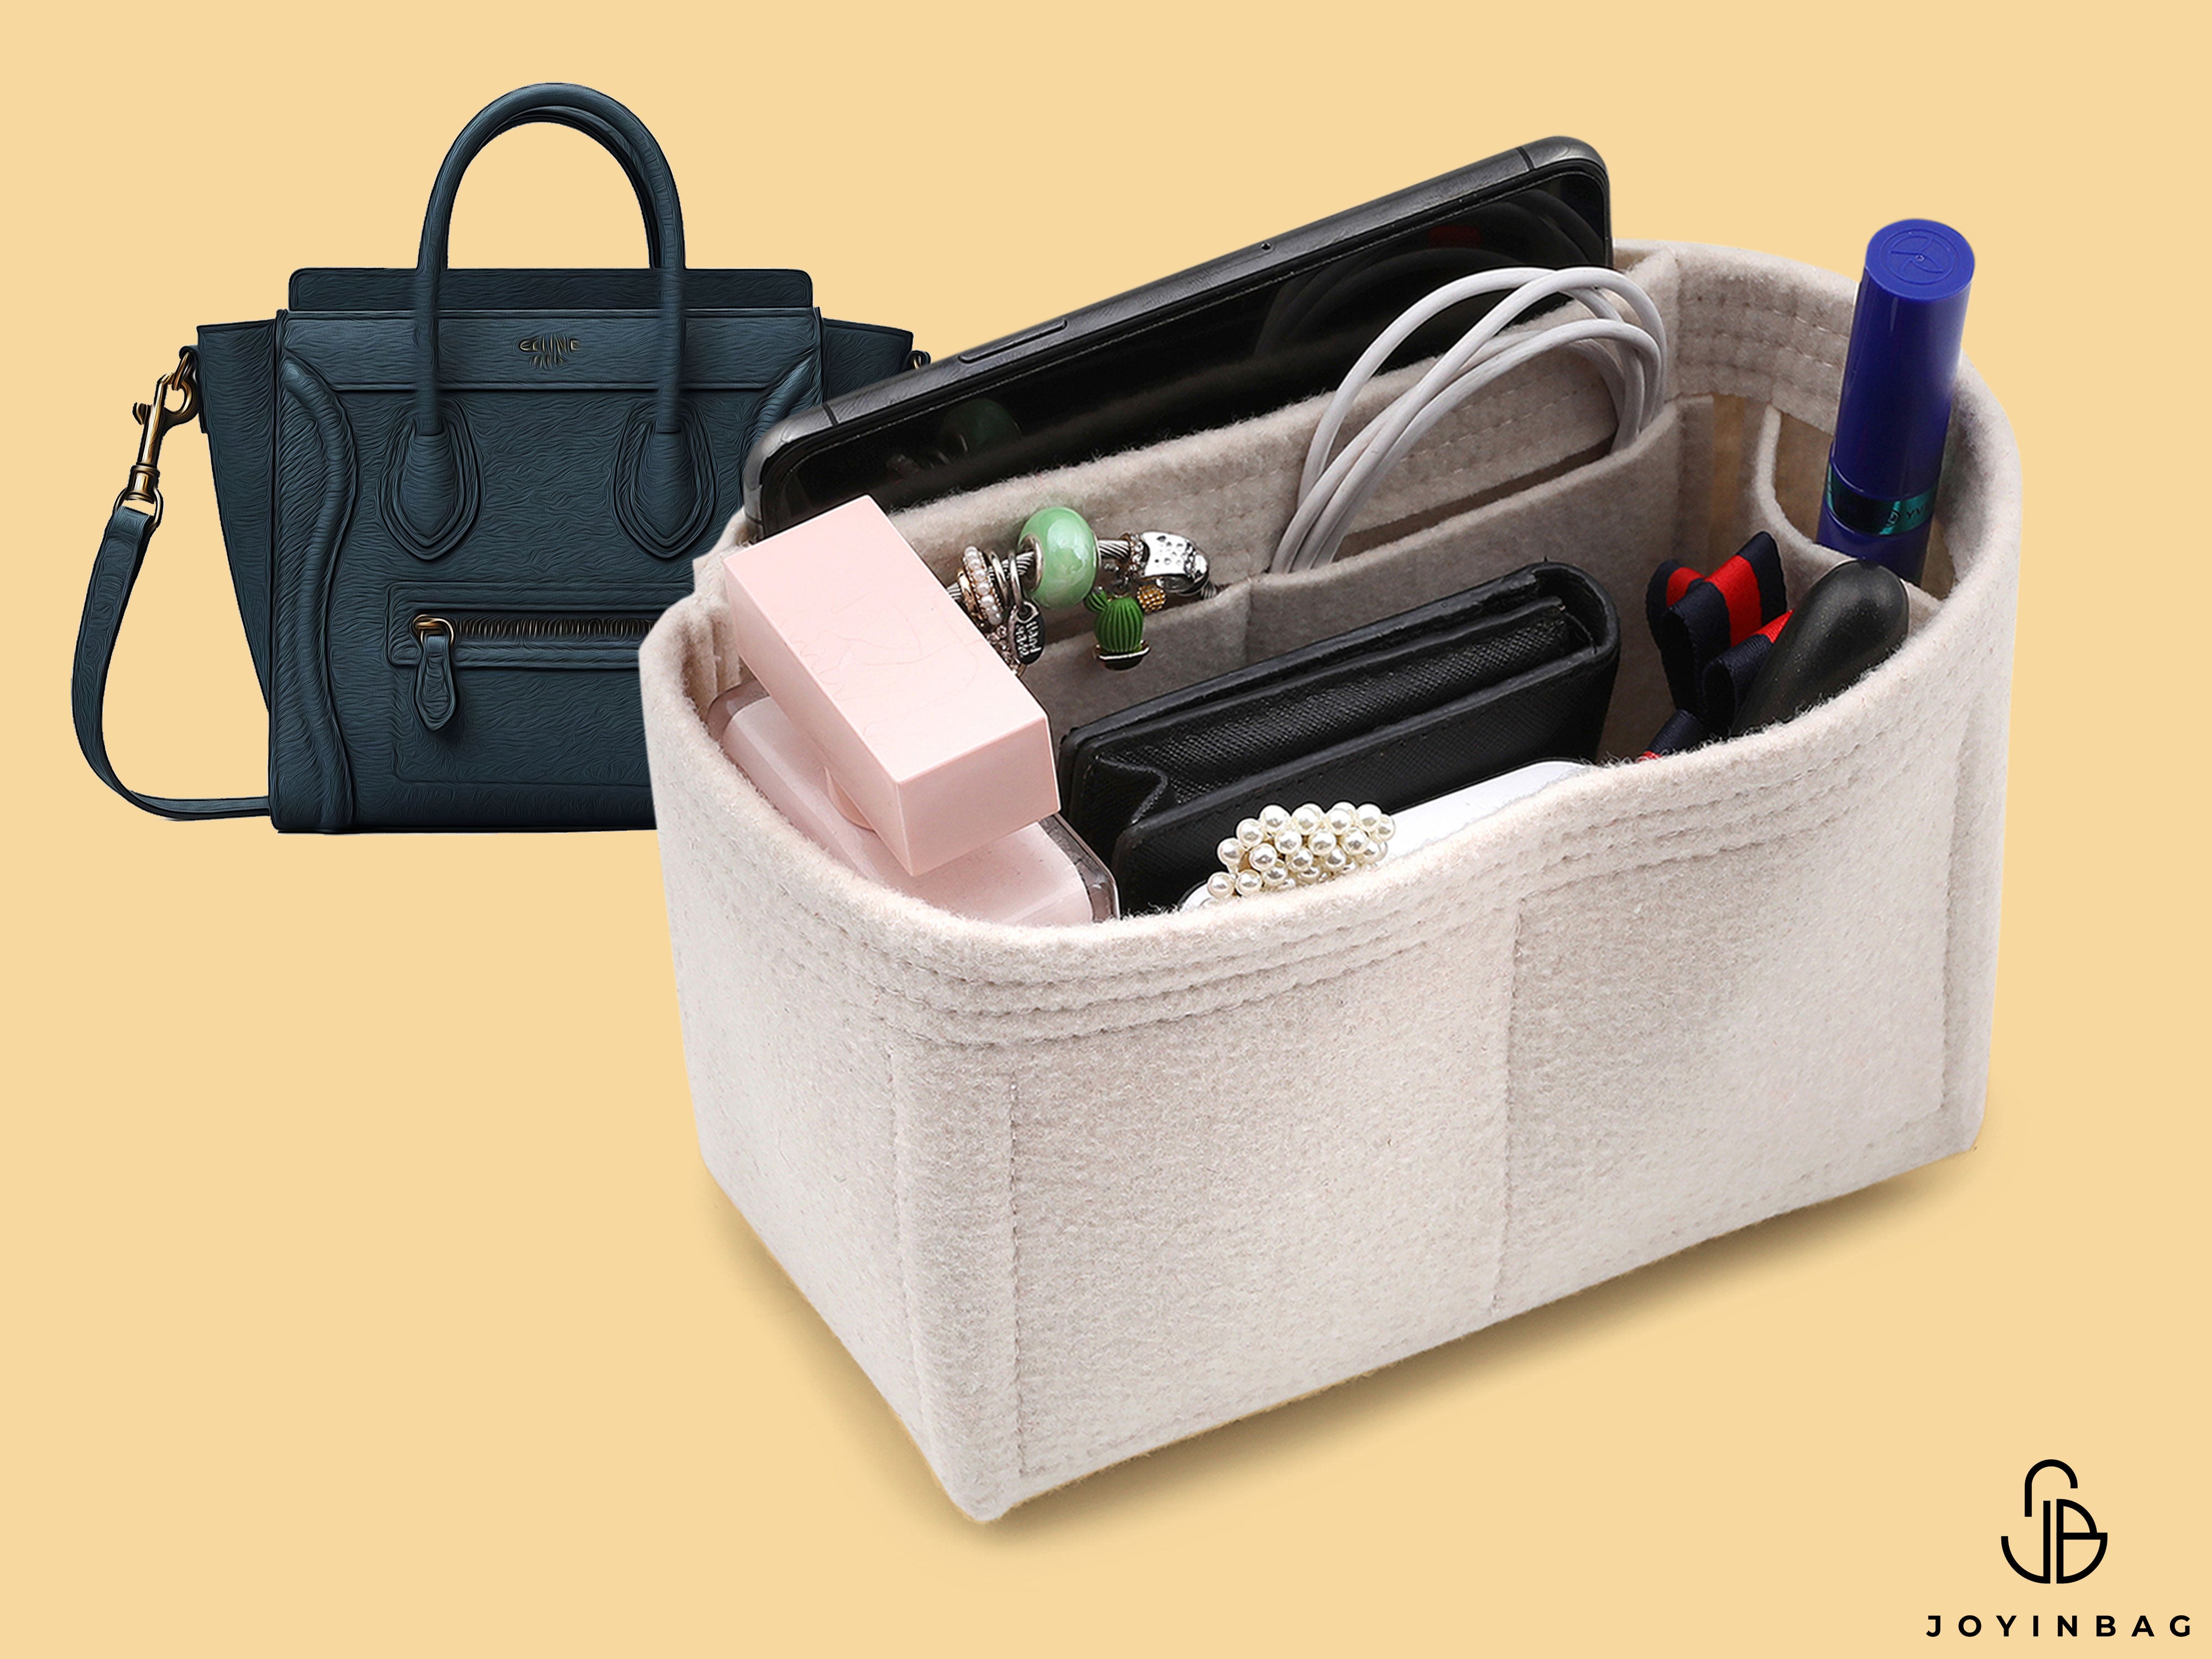  from HER Purse Organizer Insert Conversion Kit with